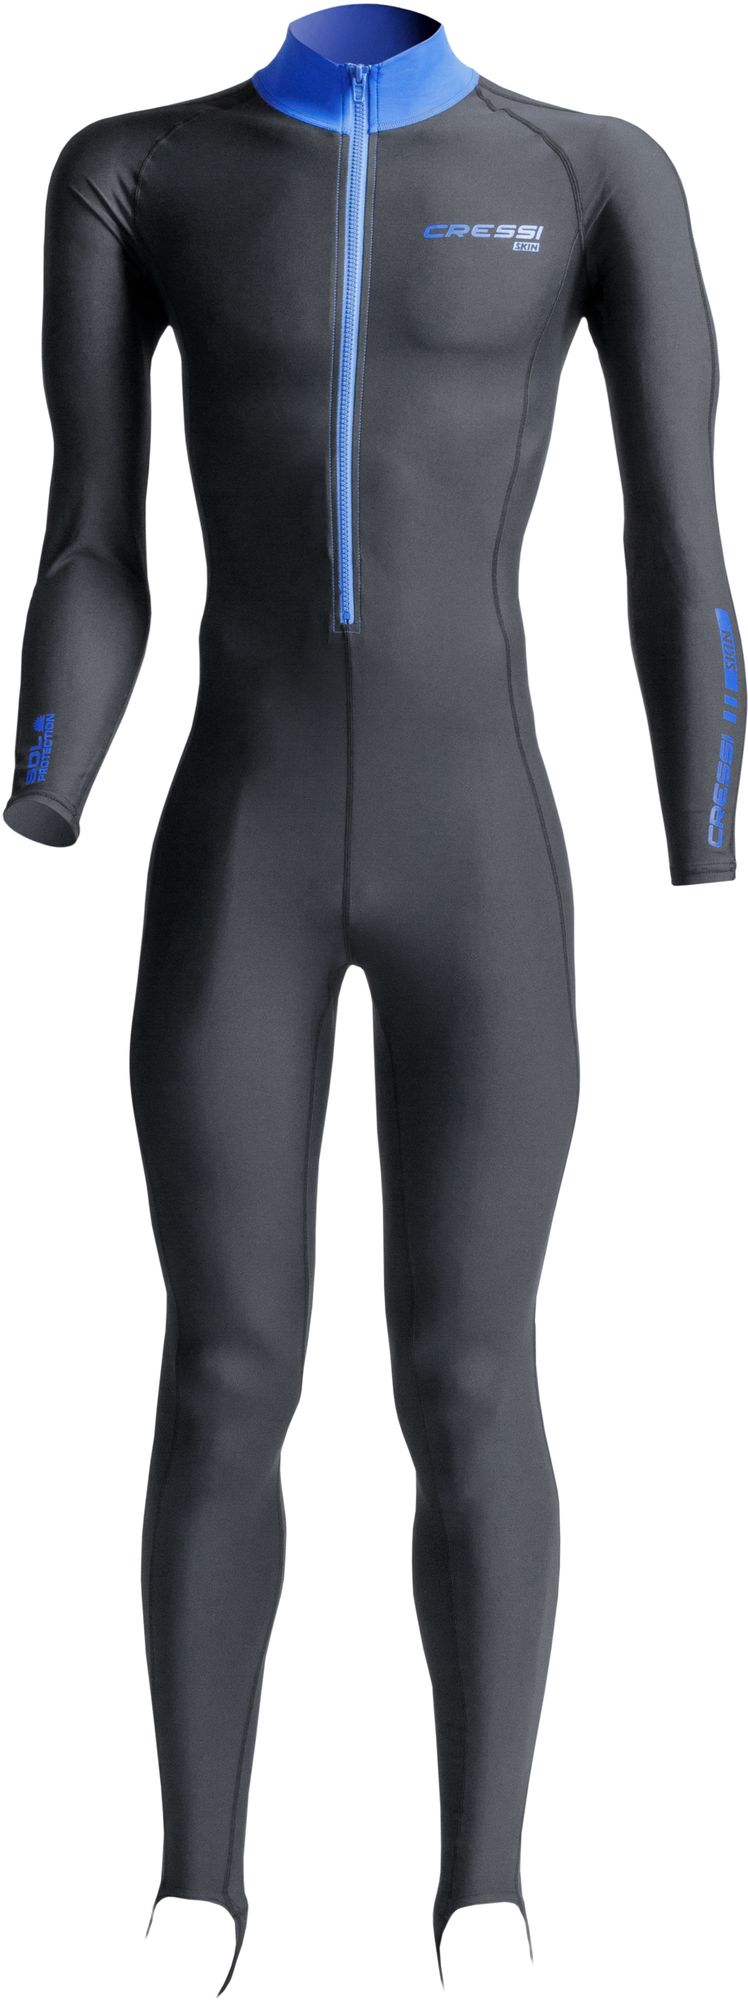 Ultra-thin WetSuit Full Body Super stretch Diving Suit Swim Surf Snorkeling  CA